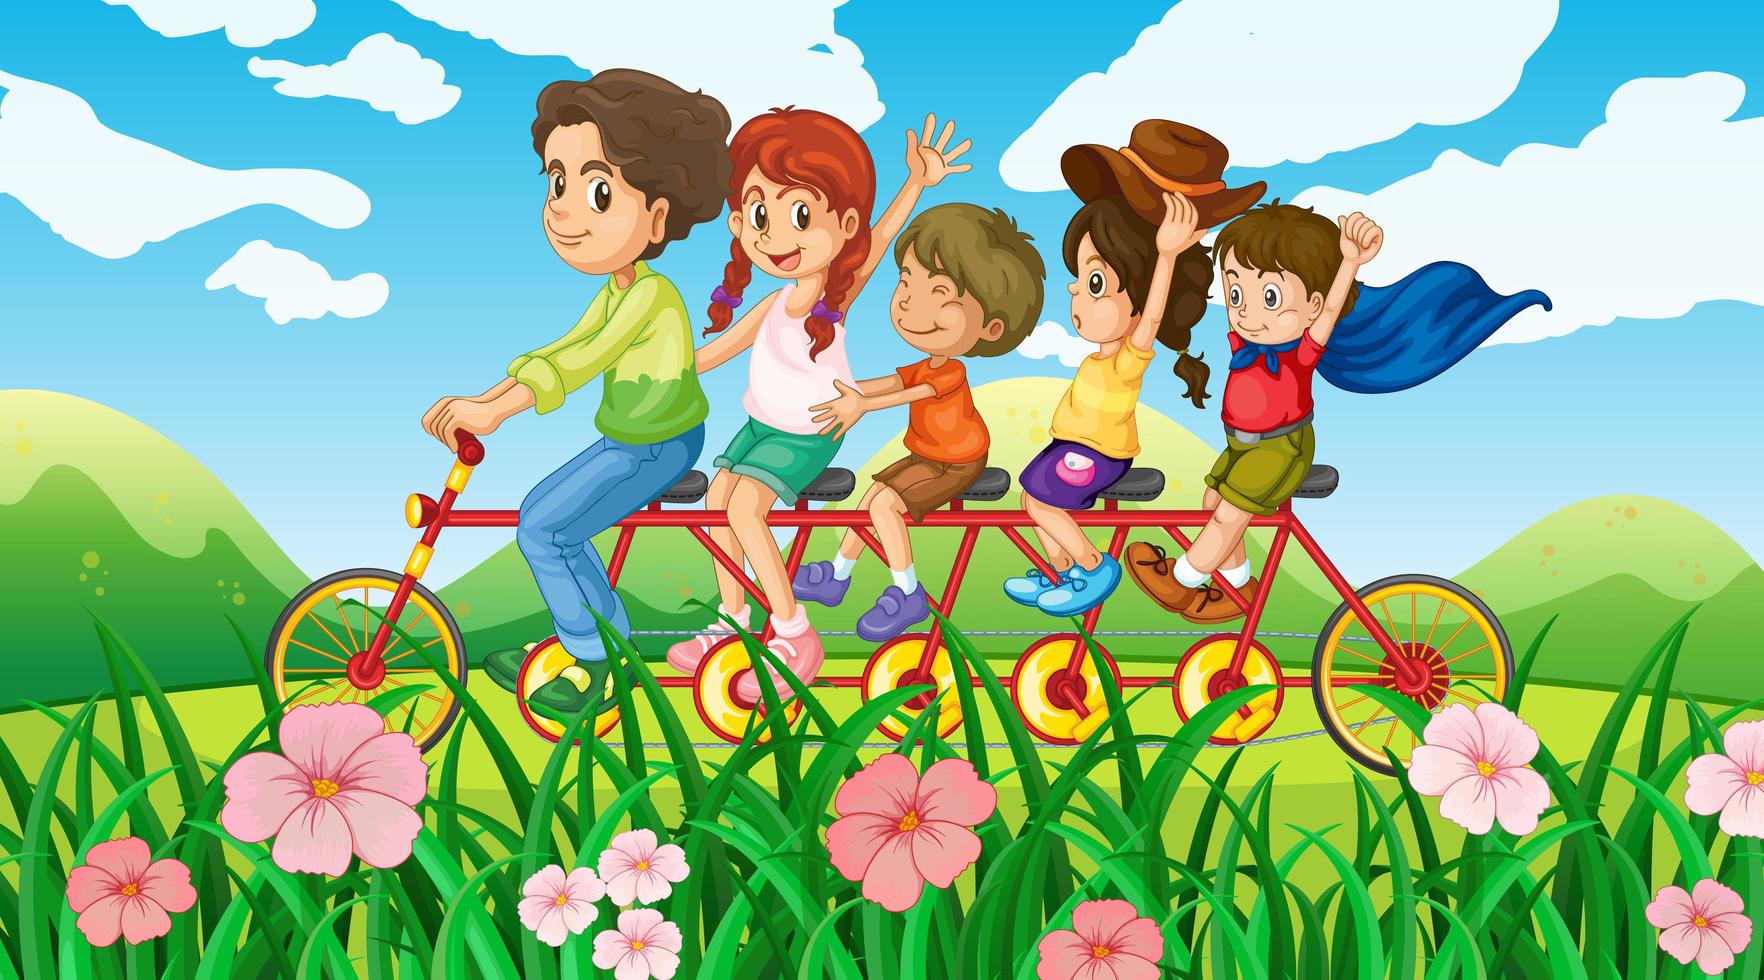 Happy group spending holiday in nature vector